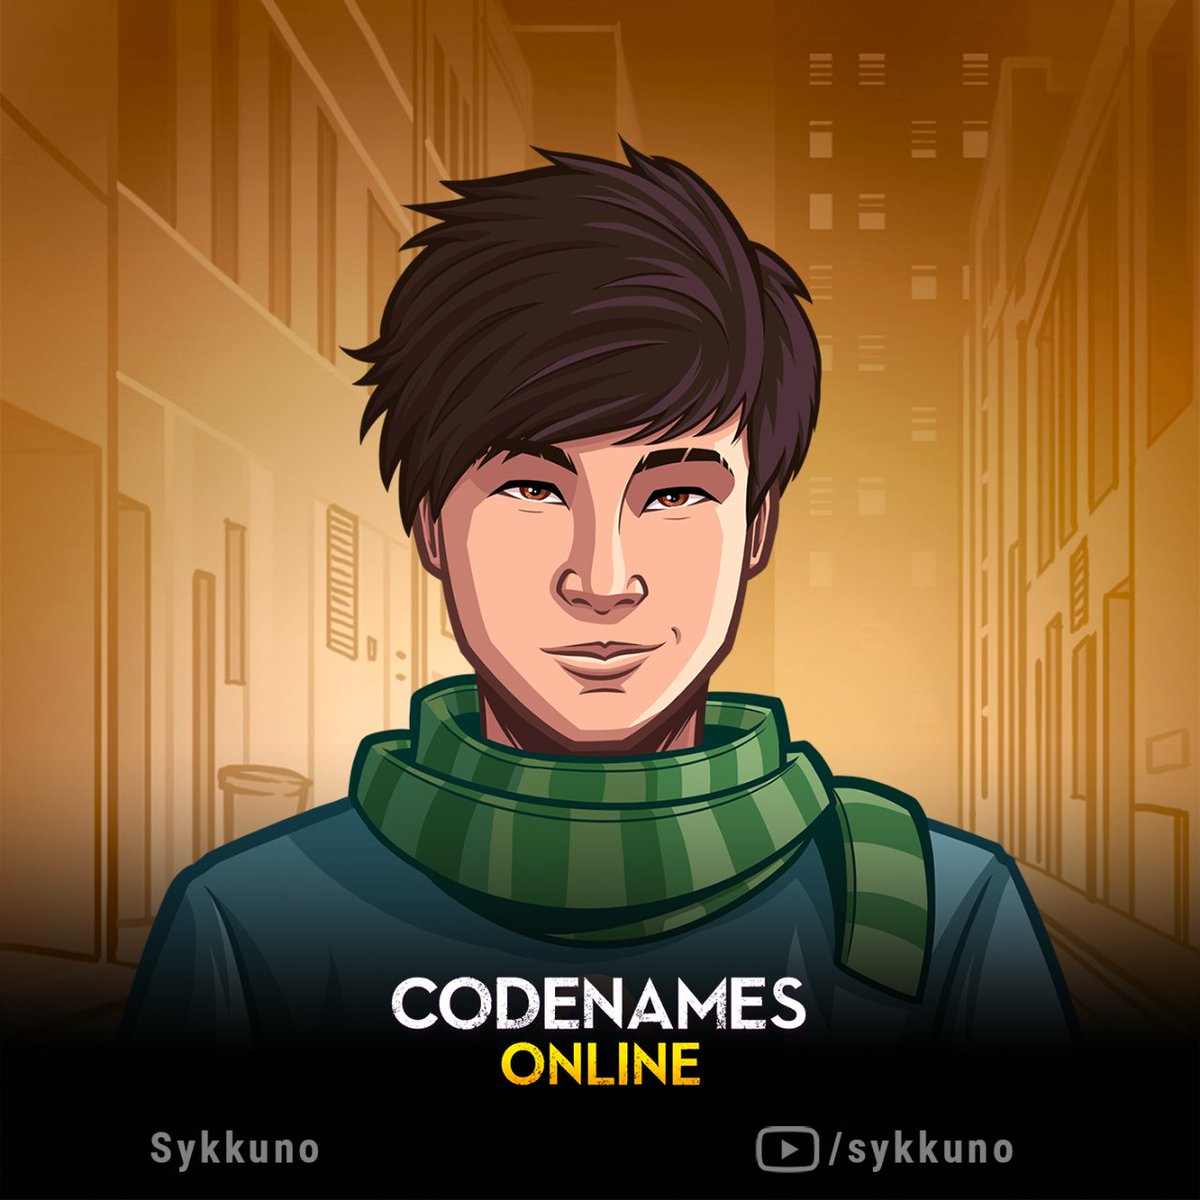 #CNcelebration

In one #Codenames journey, a certain uncle plays an important role. He introduced the game to his nephew @Sykkuno, who is one of the world's top streamers! Sykkuno now enjoys playing Codenames on stream with friends! 

📺 youtube.com/sykkuno
⏱️ Pacific Time